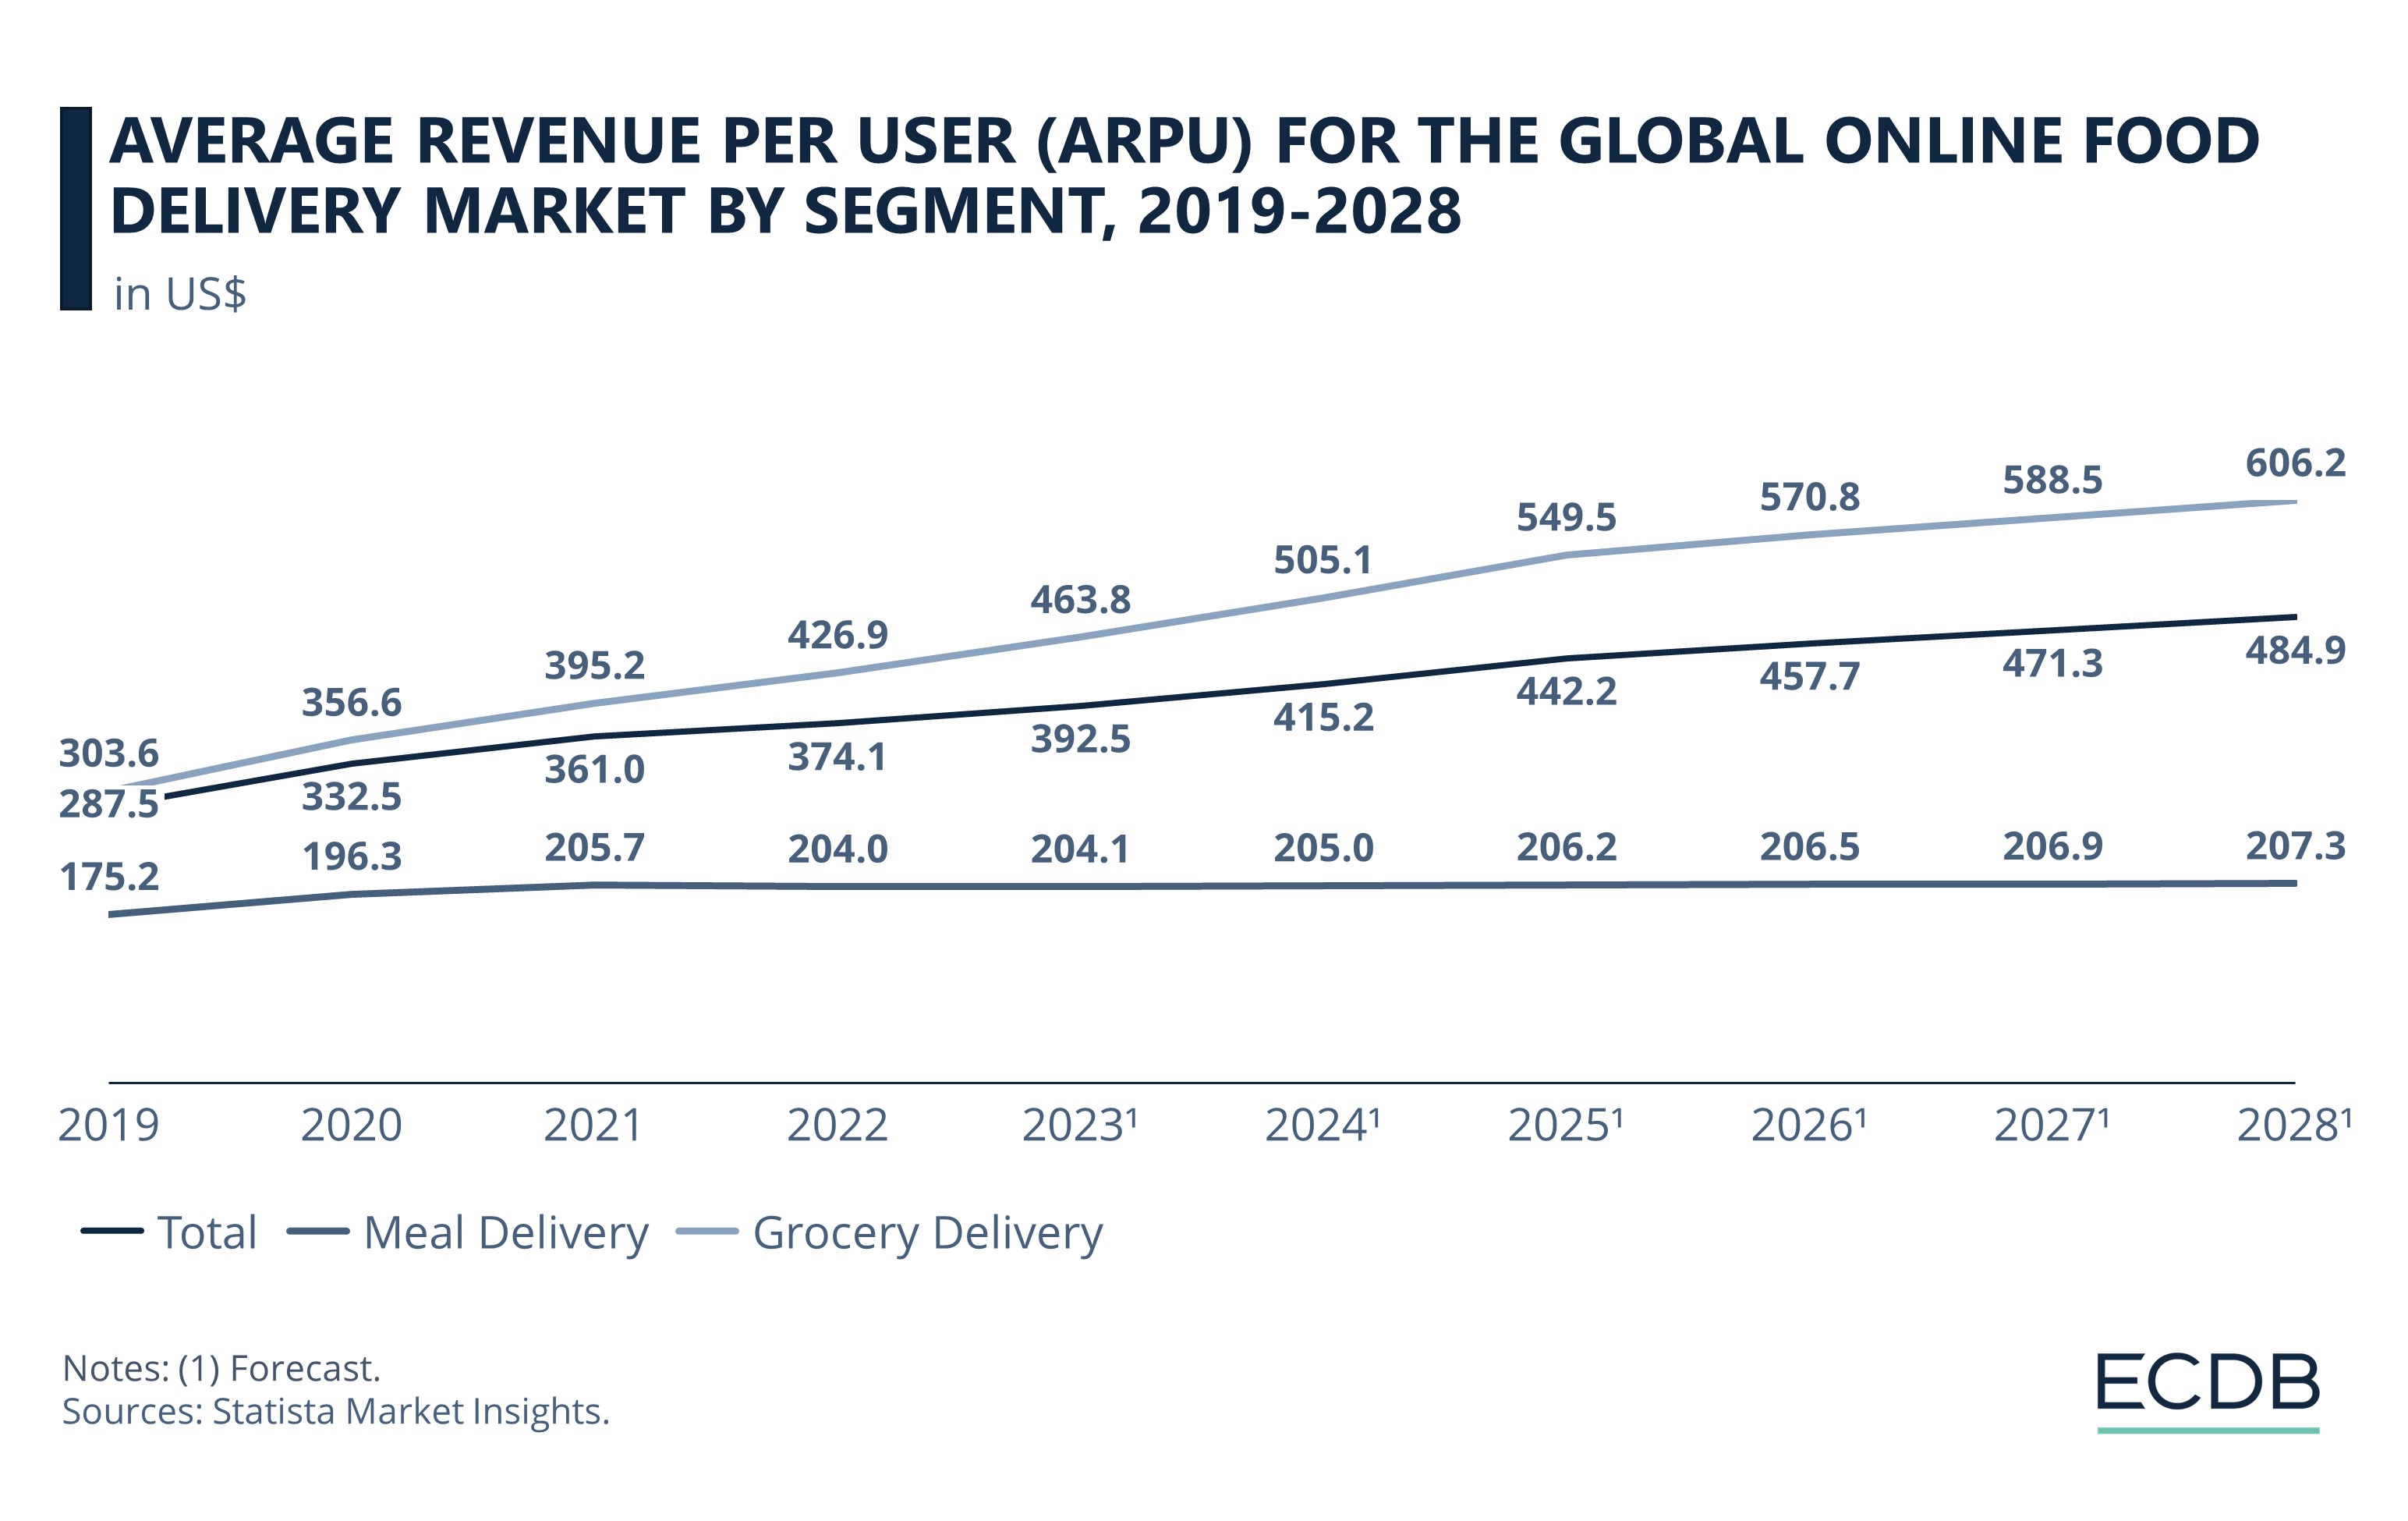 Average Revenue per User (ARPU) for the Global Online Food Delivery Market by Segment, 2019-2028